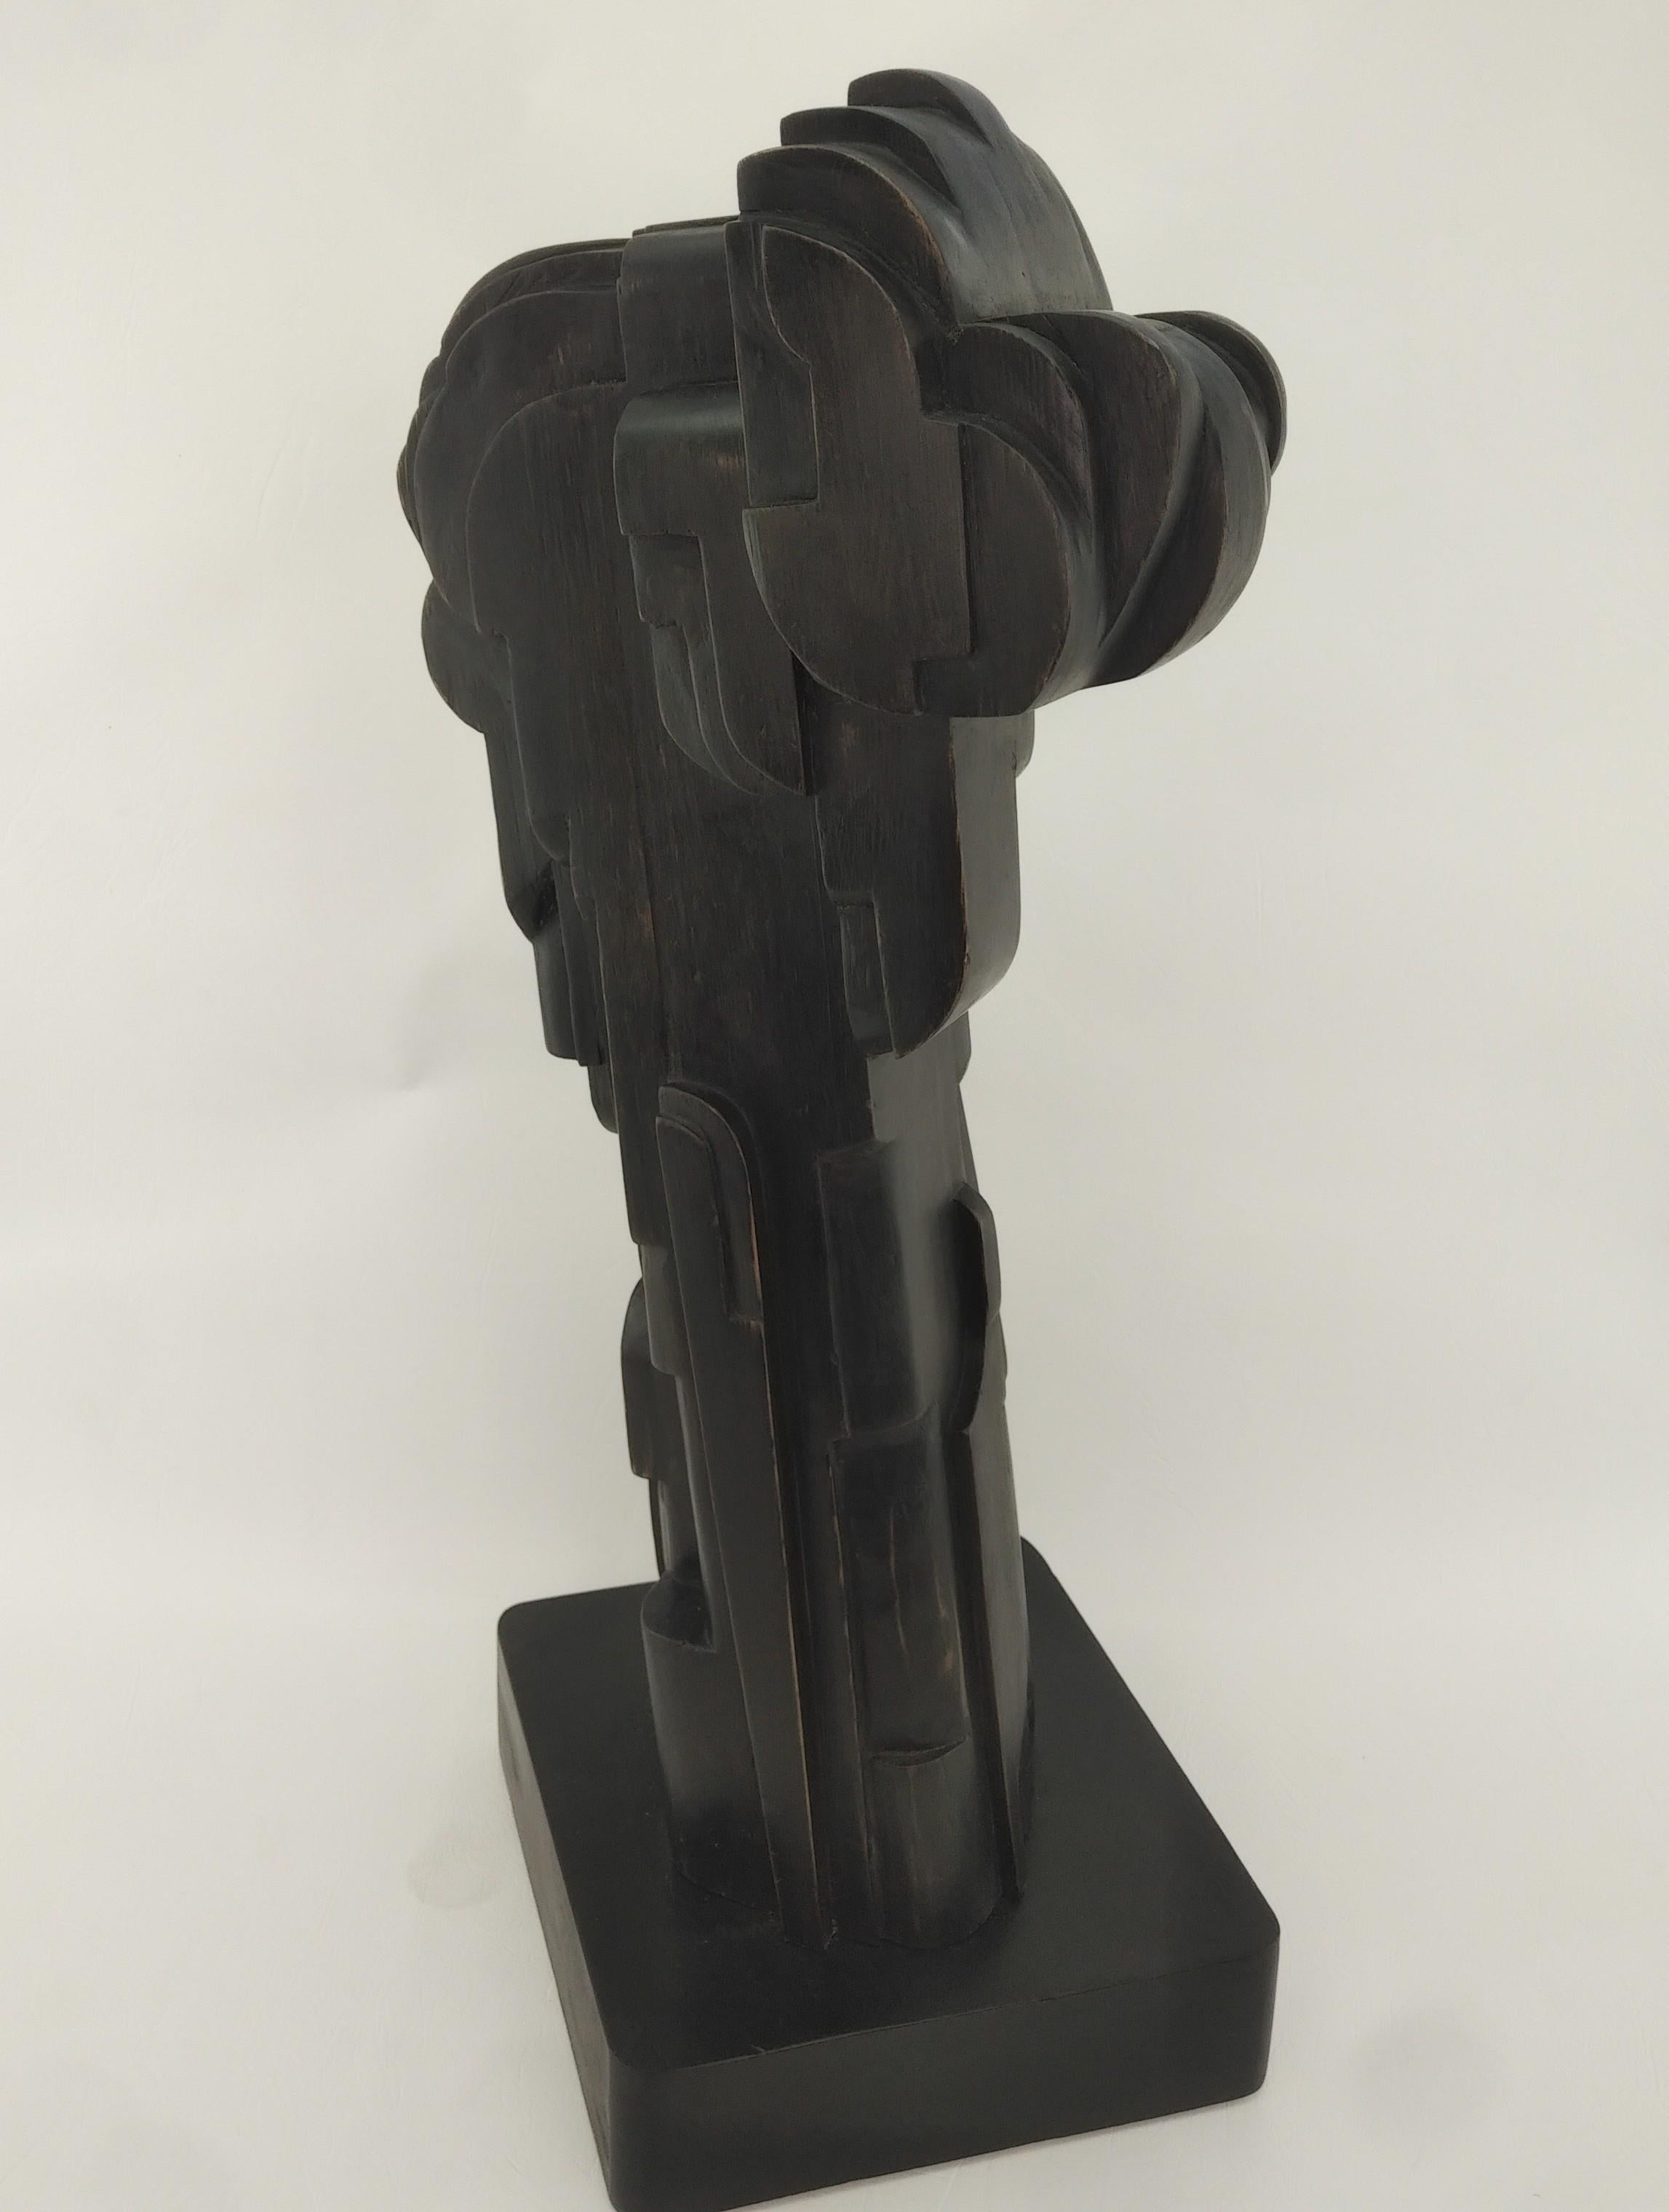 Canadian Modern Abstract Constructivist Wood Sculpture Signed Czeslaw Budny  For Sale